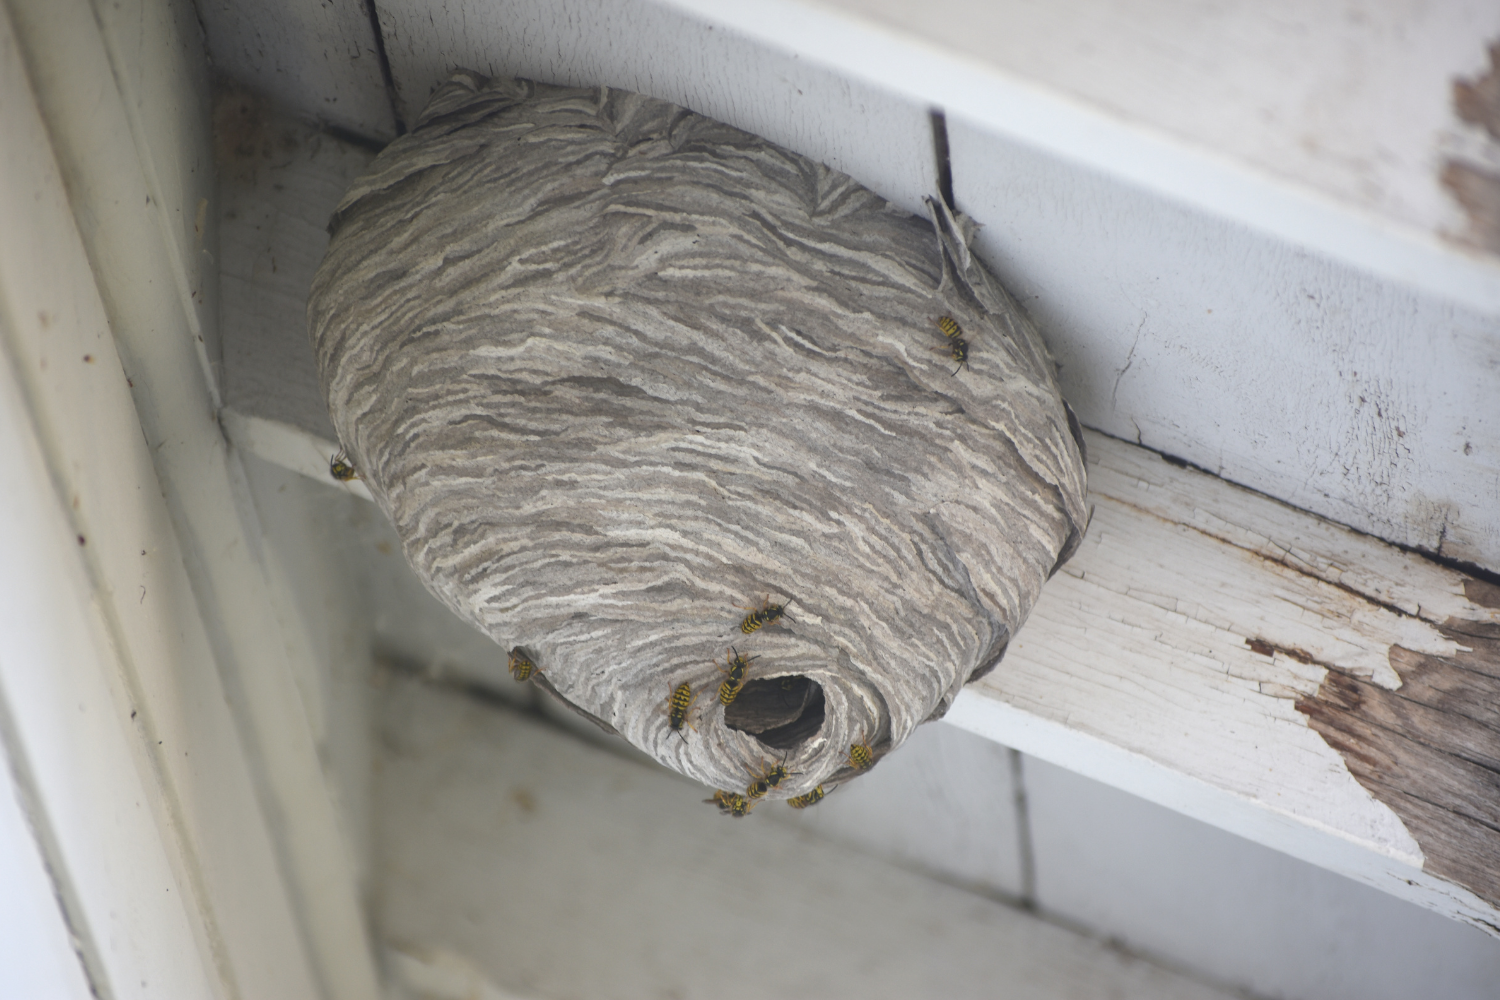 wasp nest removal, hornet nest removal, yellow jacket nest removal